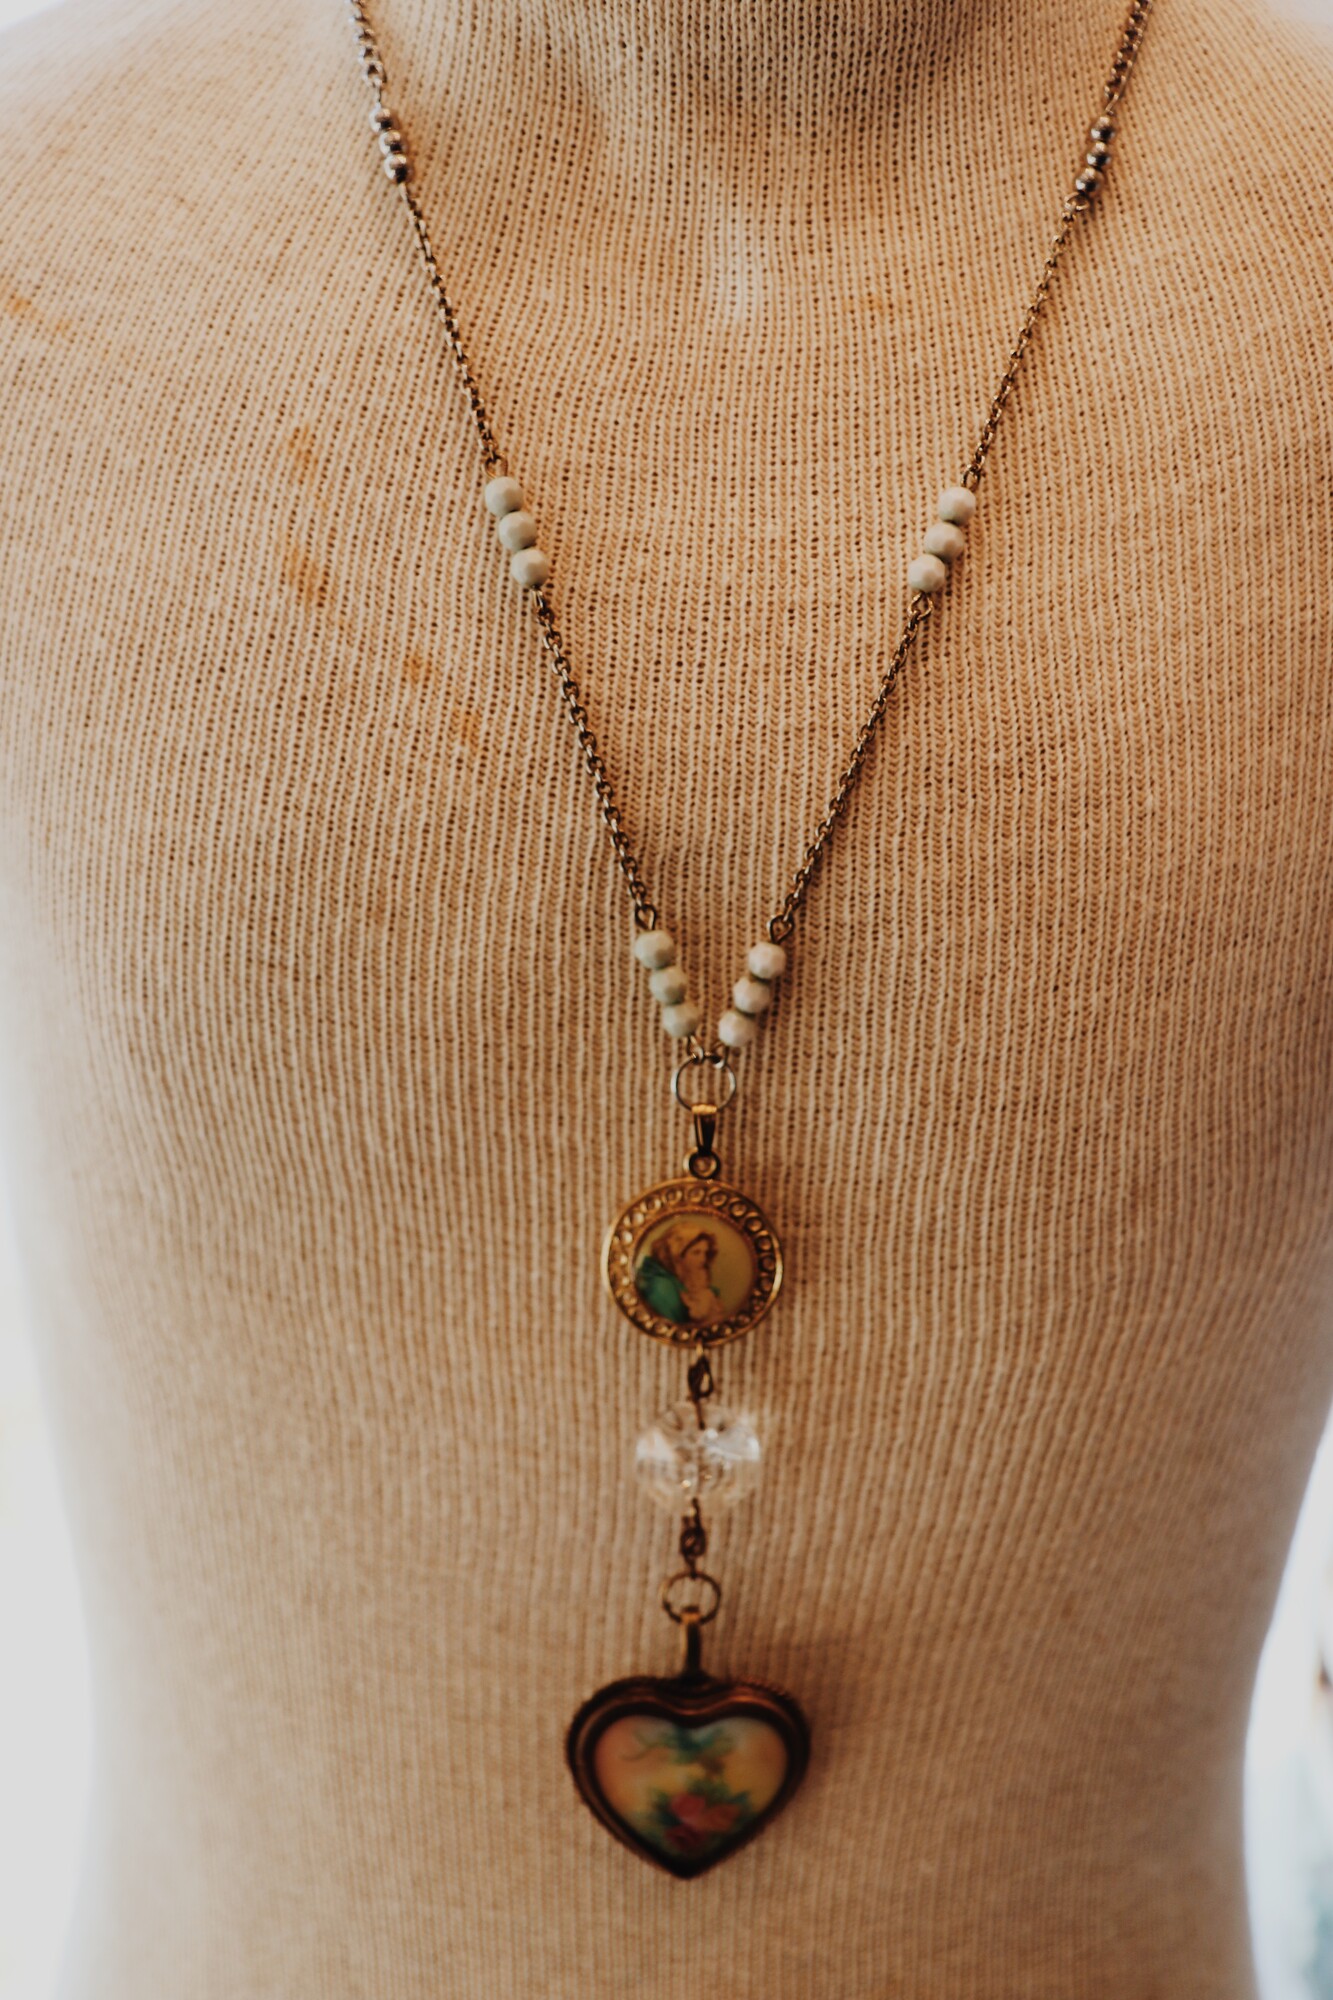 This necklace from Kelli Hawk Designs was handmade with love! It is a collaboration of multiple vintage pieces to form one lovely, dainty necklace!
Chain: 21.5 inches